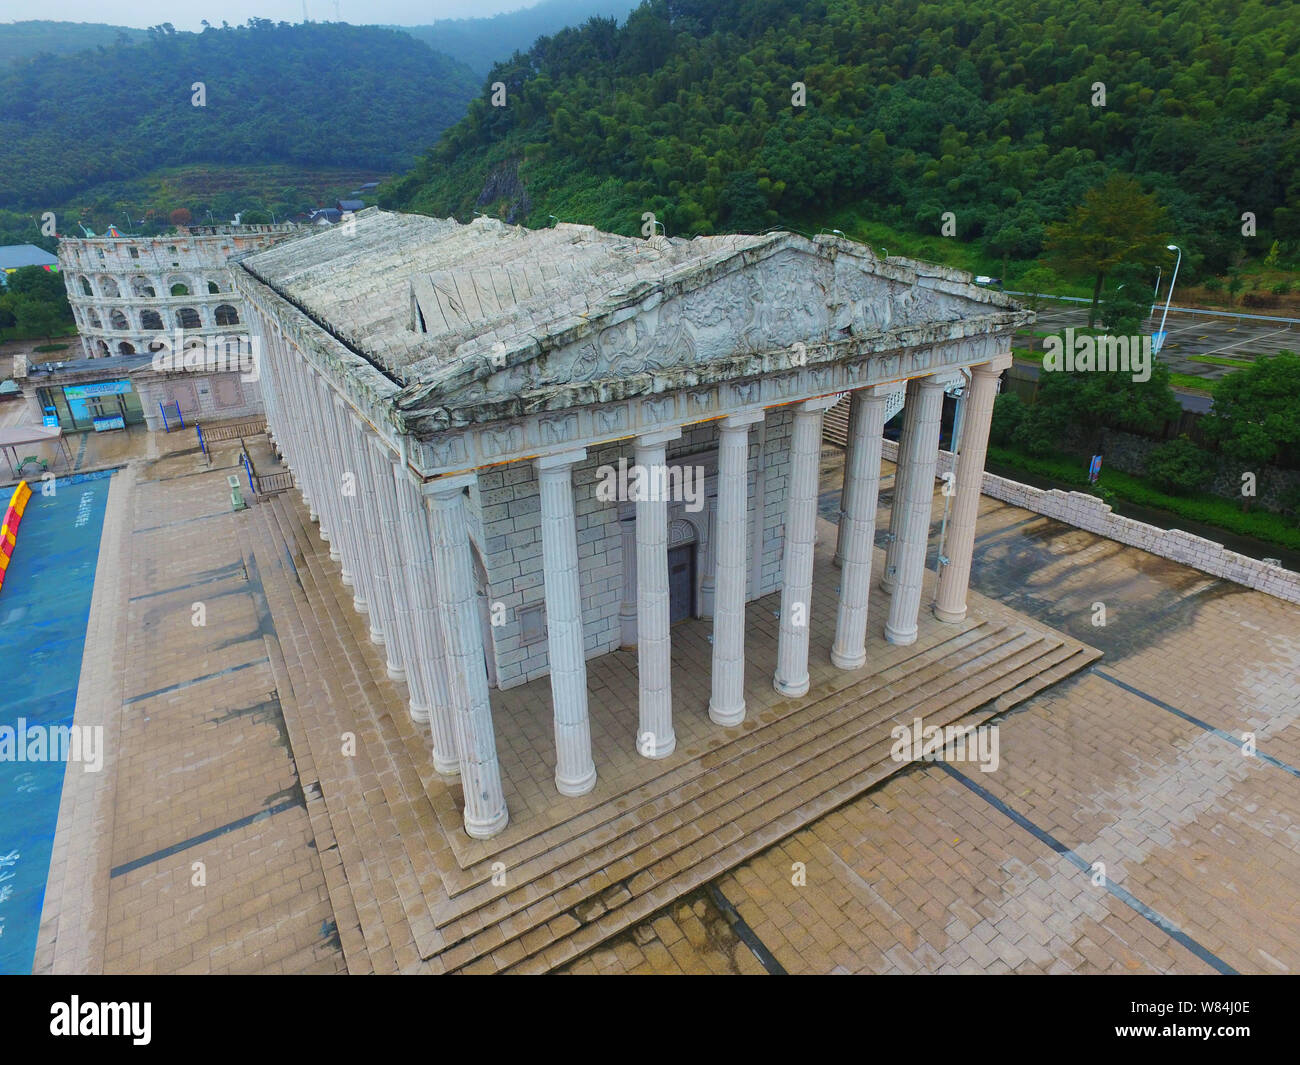 Aerial view of a replica of the Parthenon at a scenic spot in Ningbo city, east China's Zhejiang province, 7 October 2016.   Replicas of world landmar Stock Photo